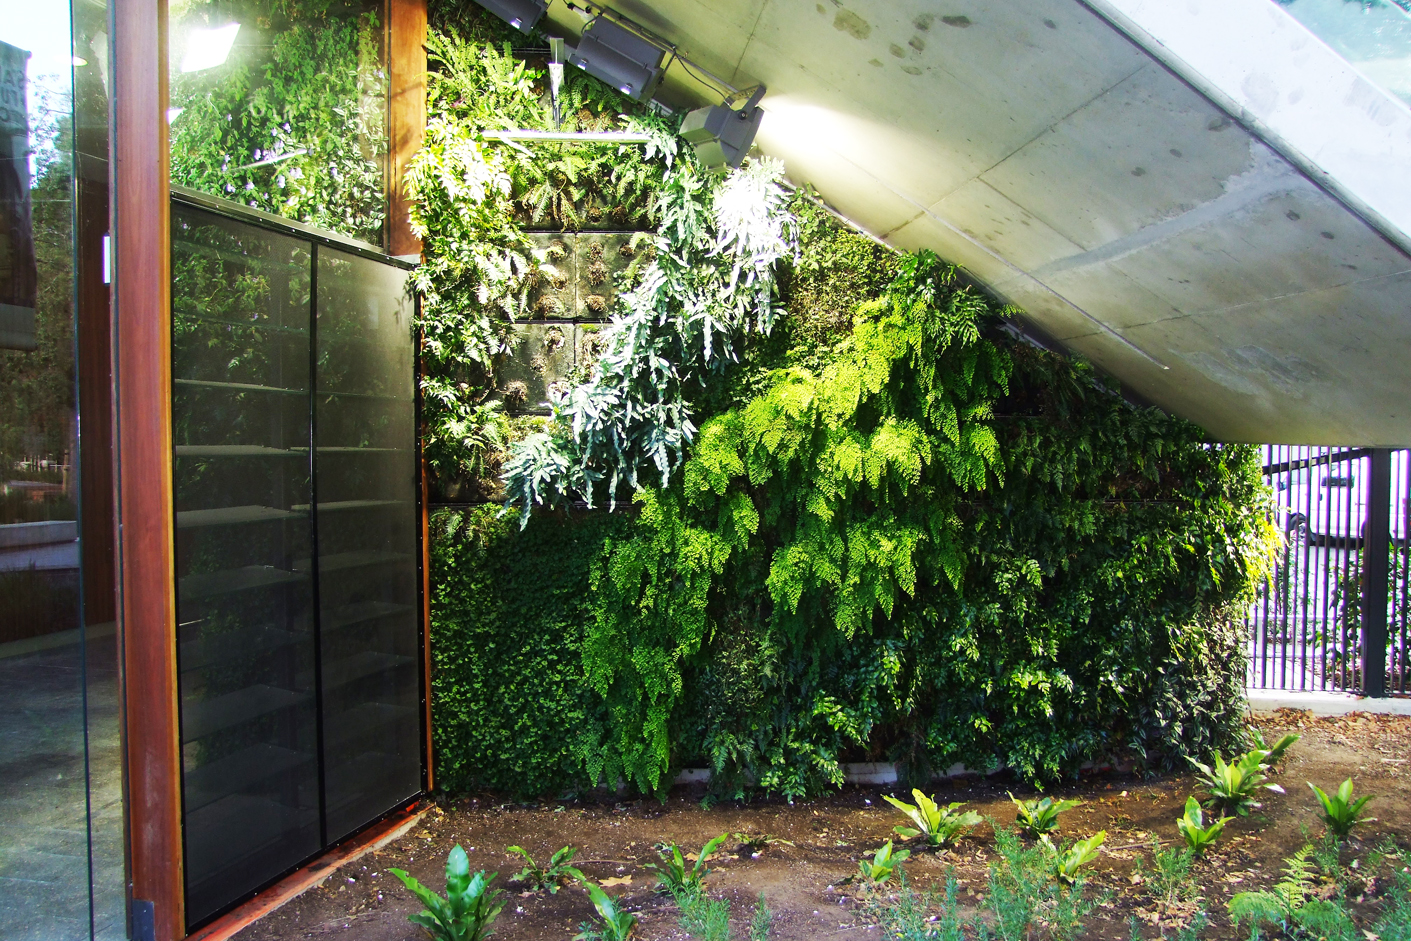 Retrofitted grow lights were not enough to save this heavily shaded green wall that no longer exists